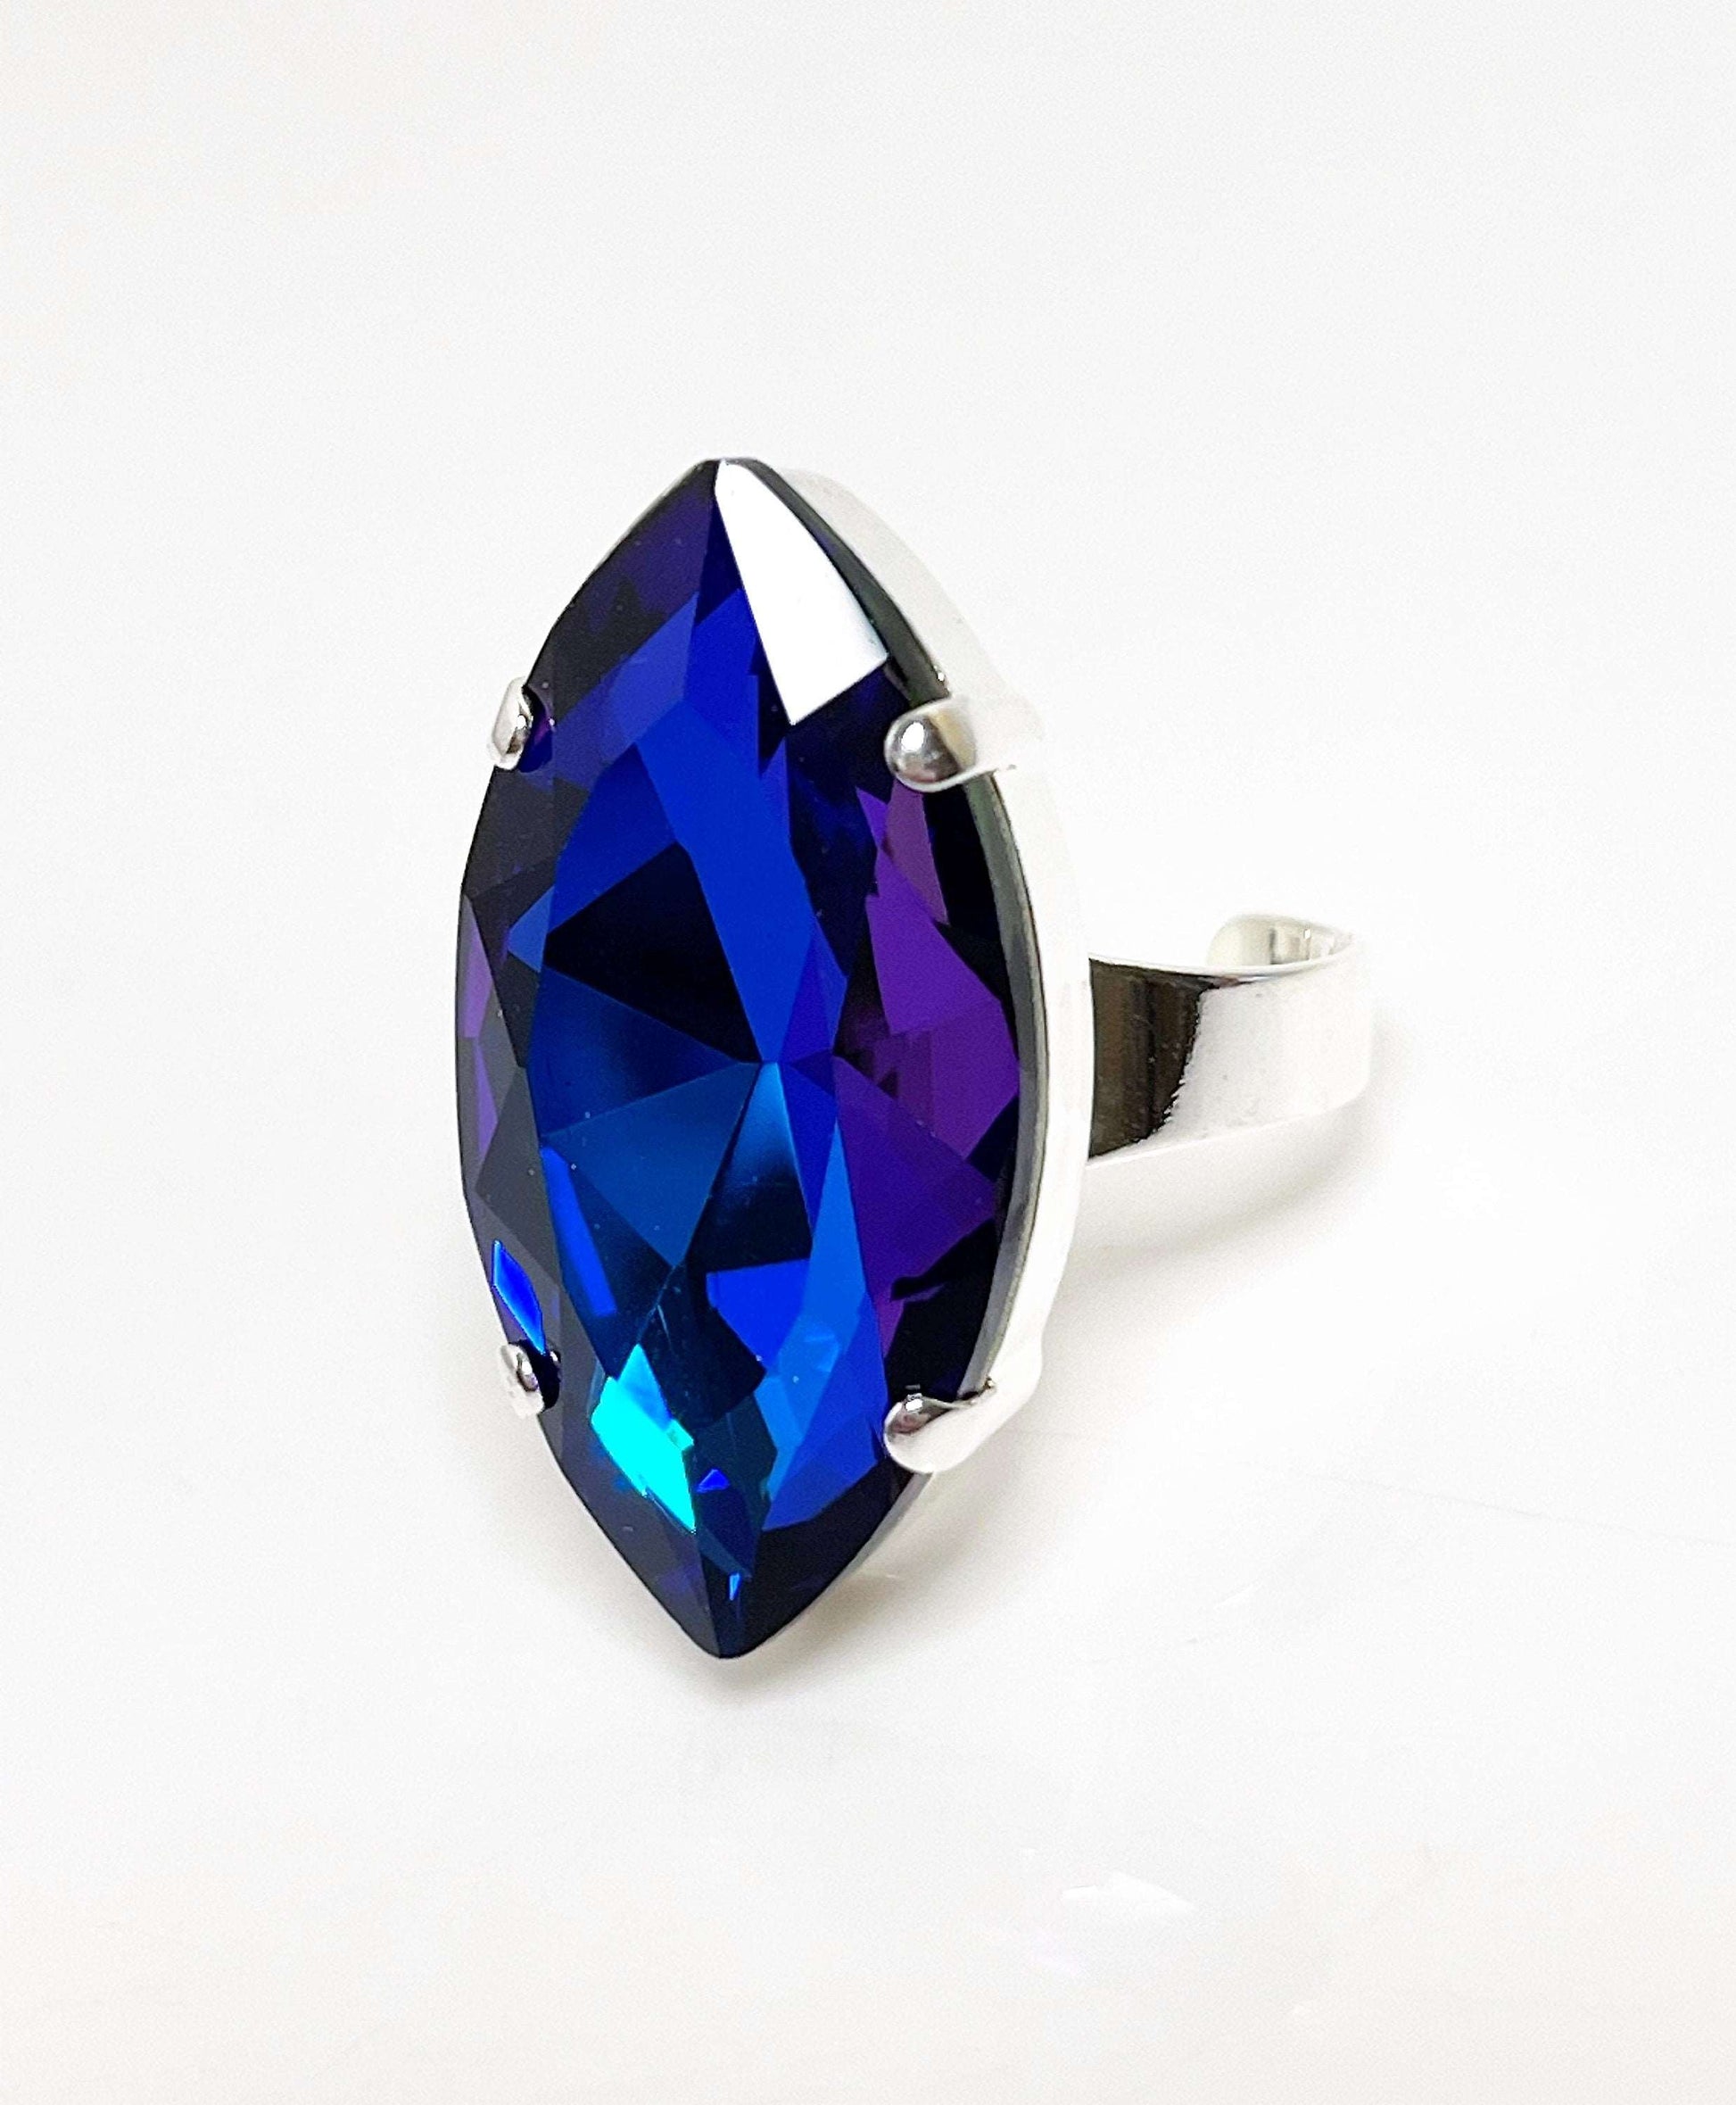 Blue Crystal Ring | Large Statement Ring | Silver Plated | Bermuda Blue Navette